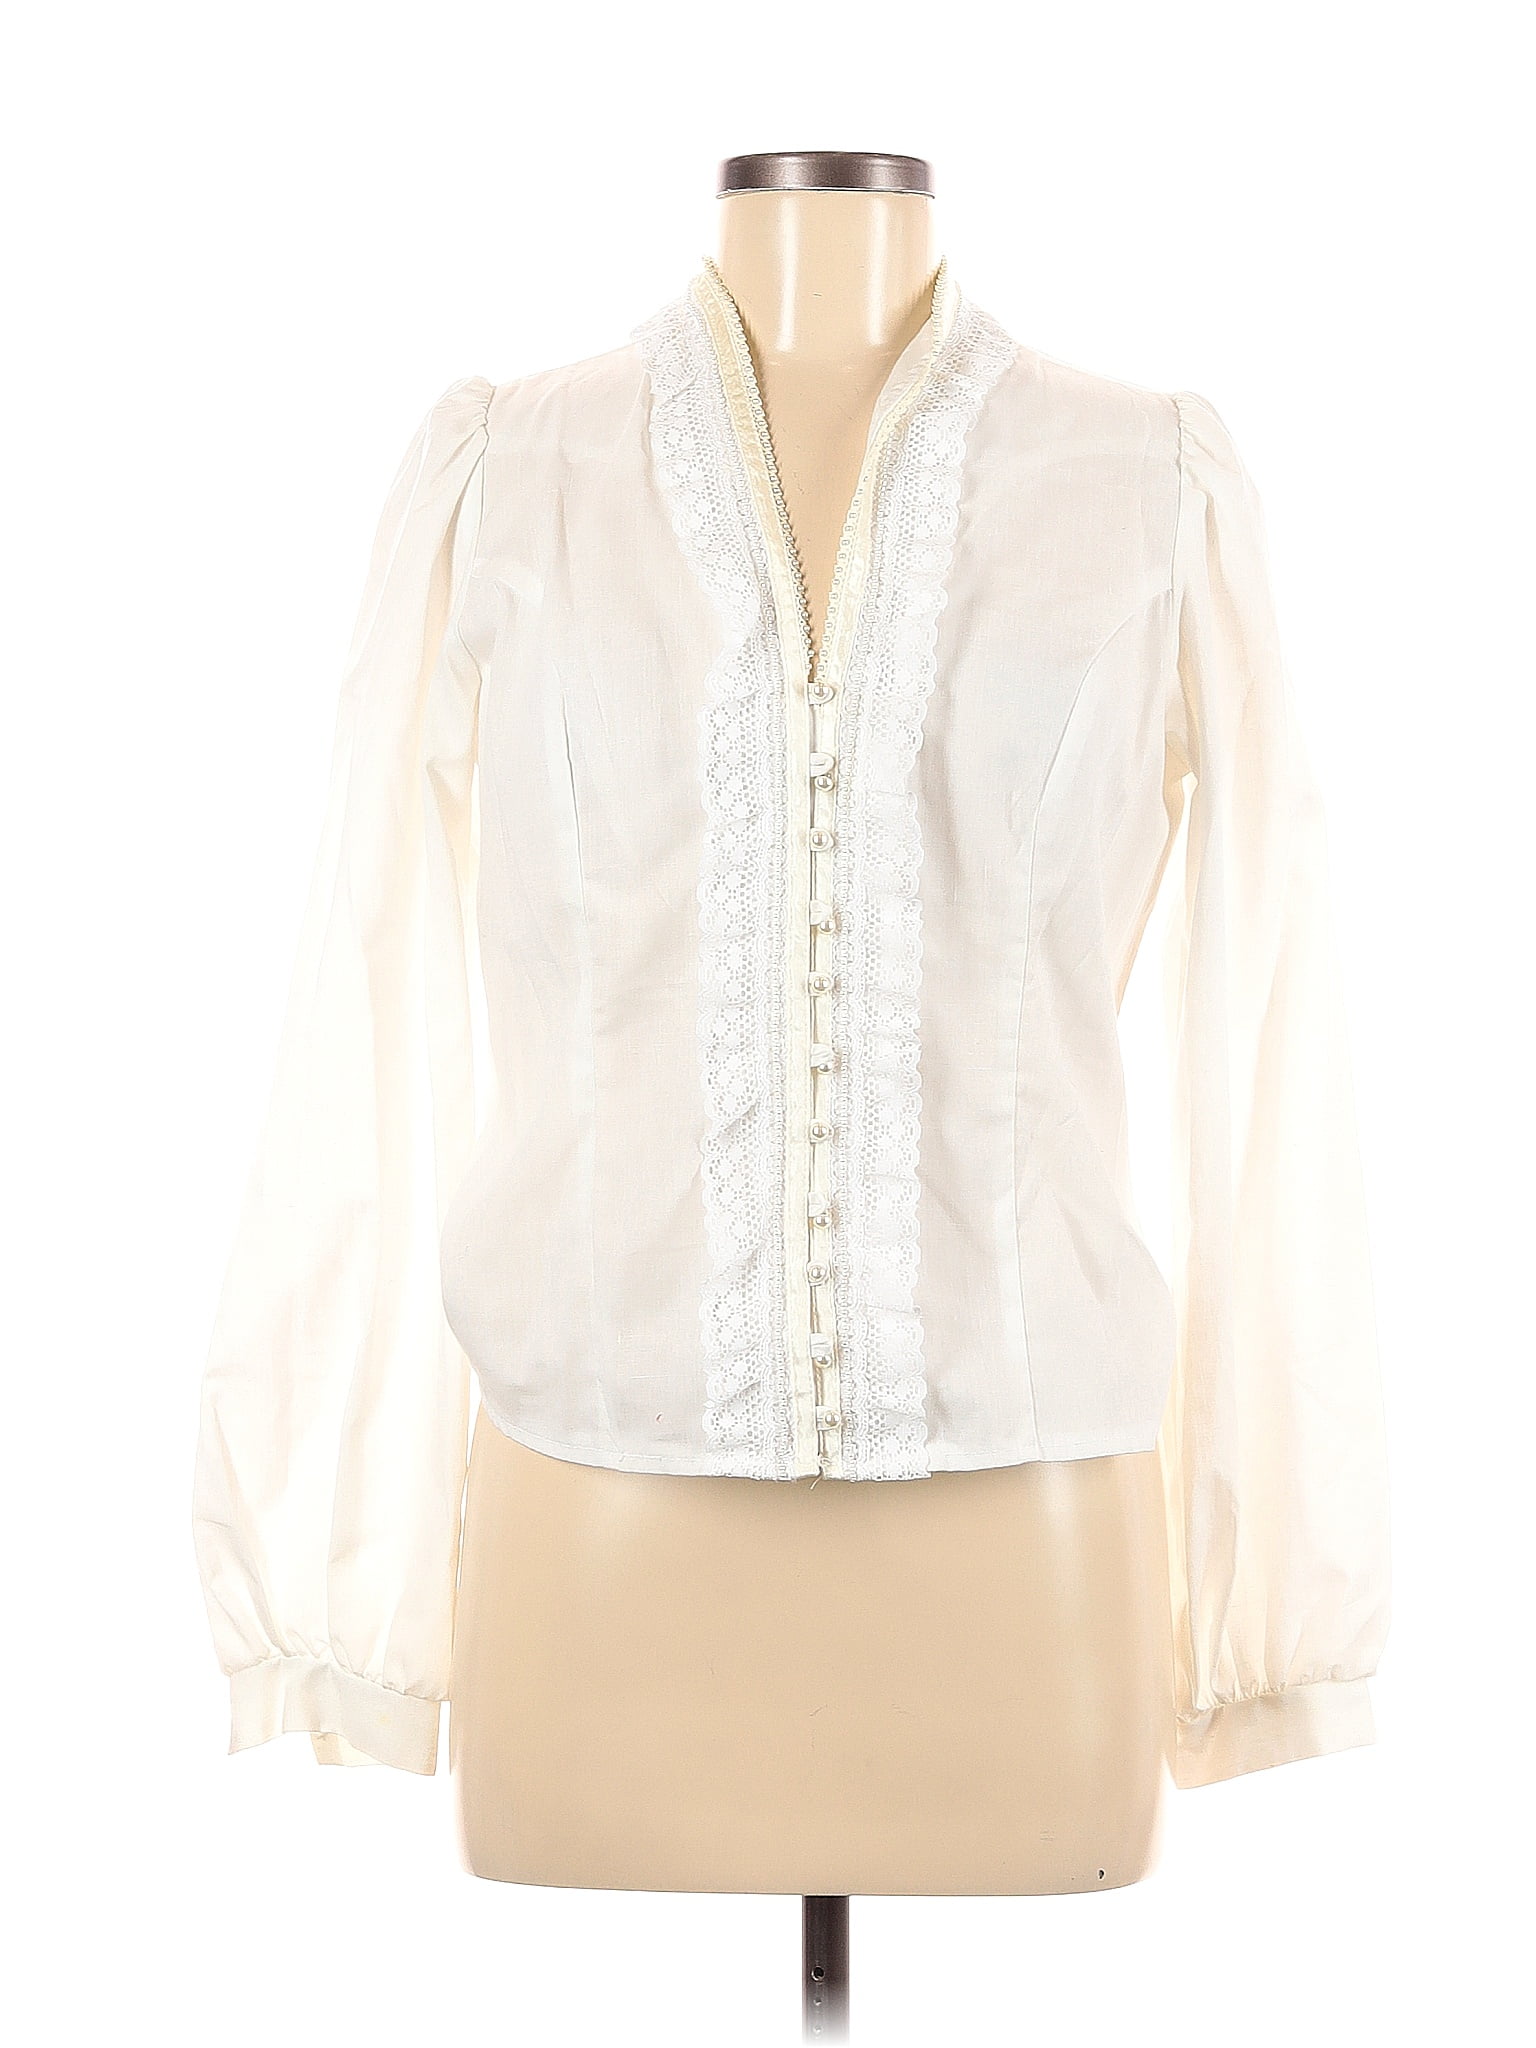 Jessica's Gunnies White Ivory Long Sleeve Top Size 18 (Plus) - 26% off ...